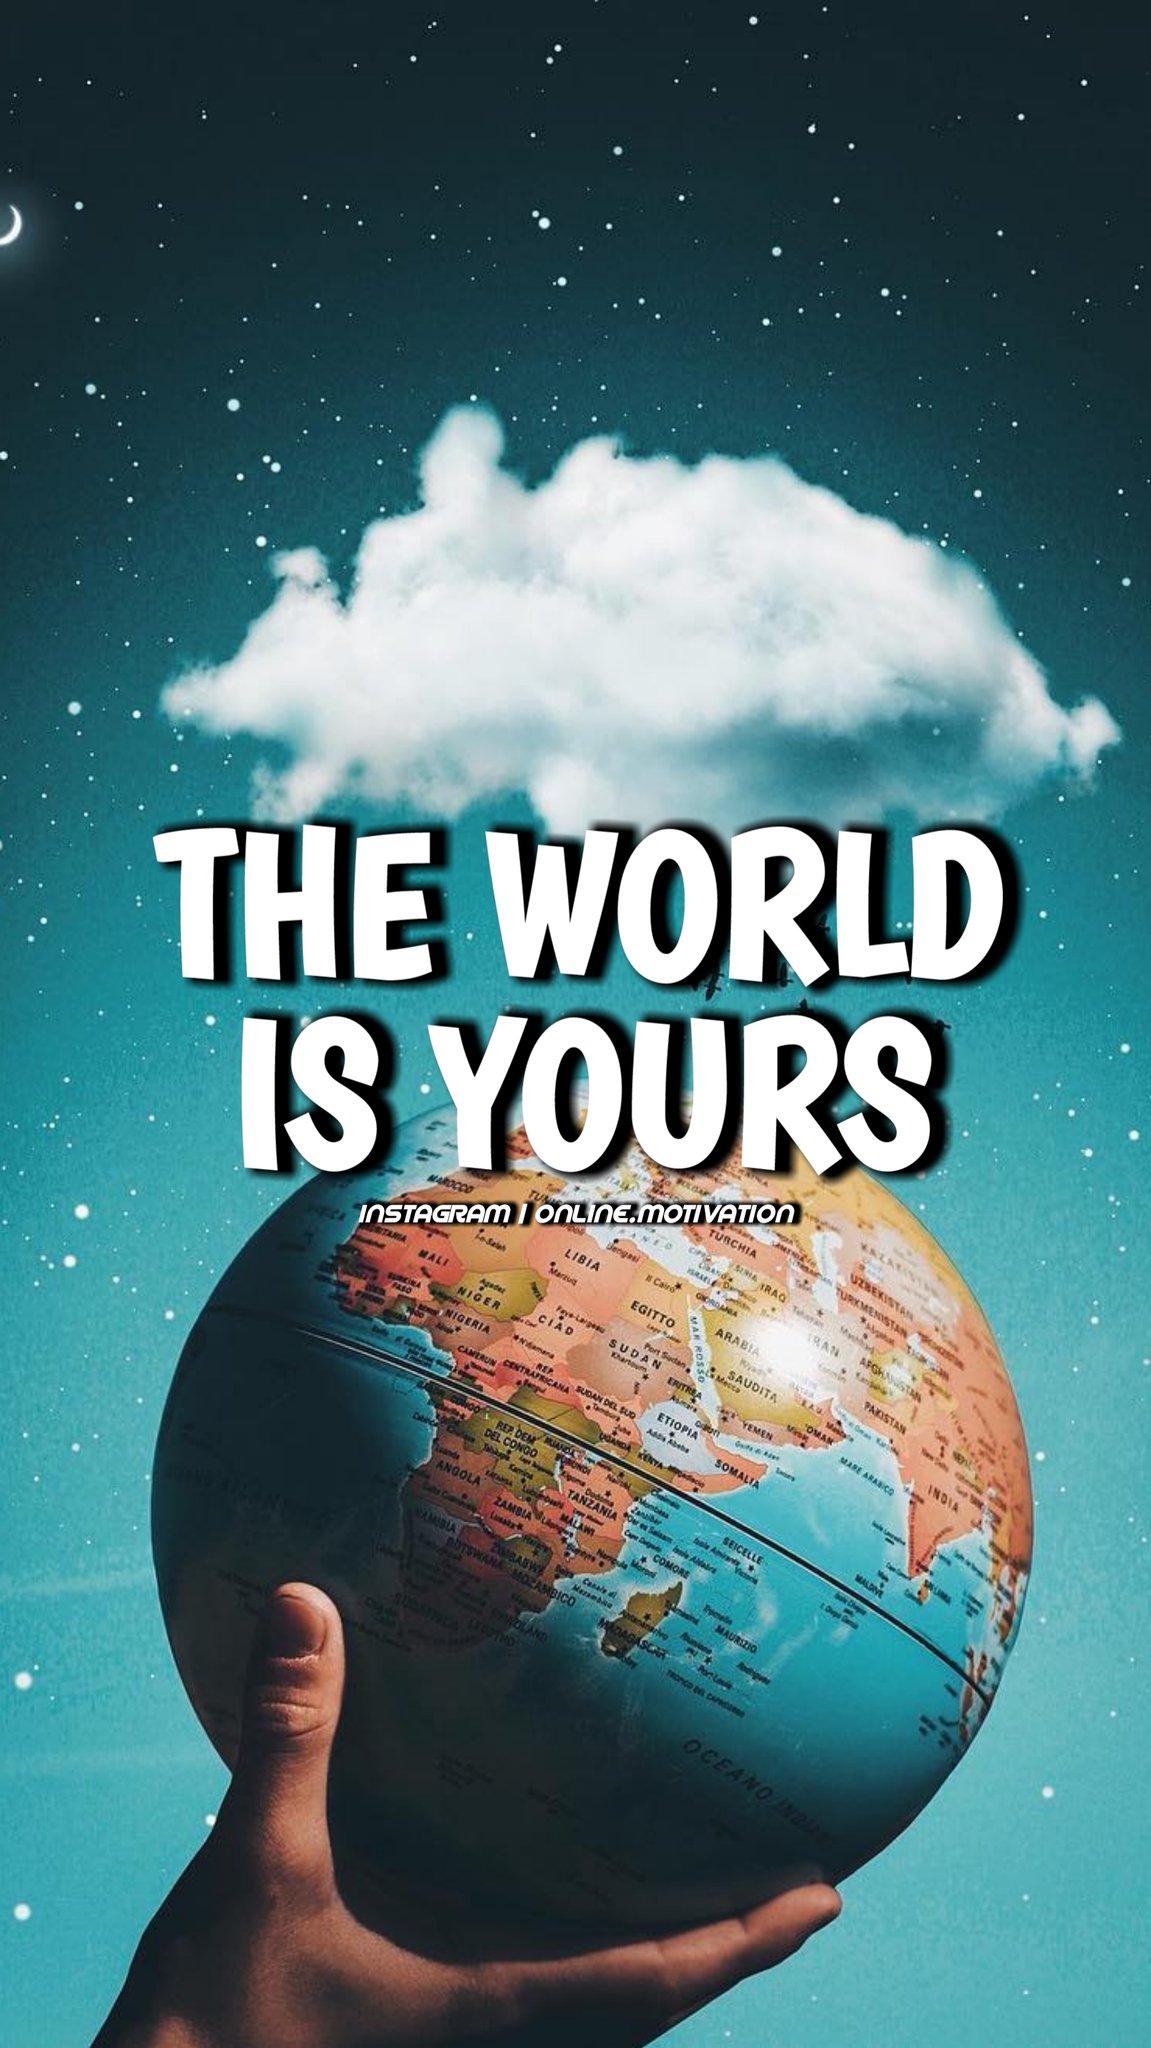 The world is yours world yours 3D abstract HD wallpaper  Peakpx